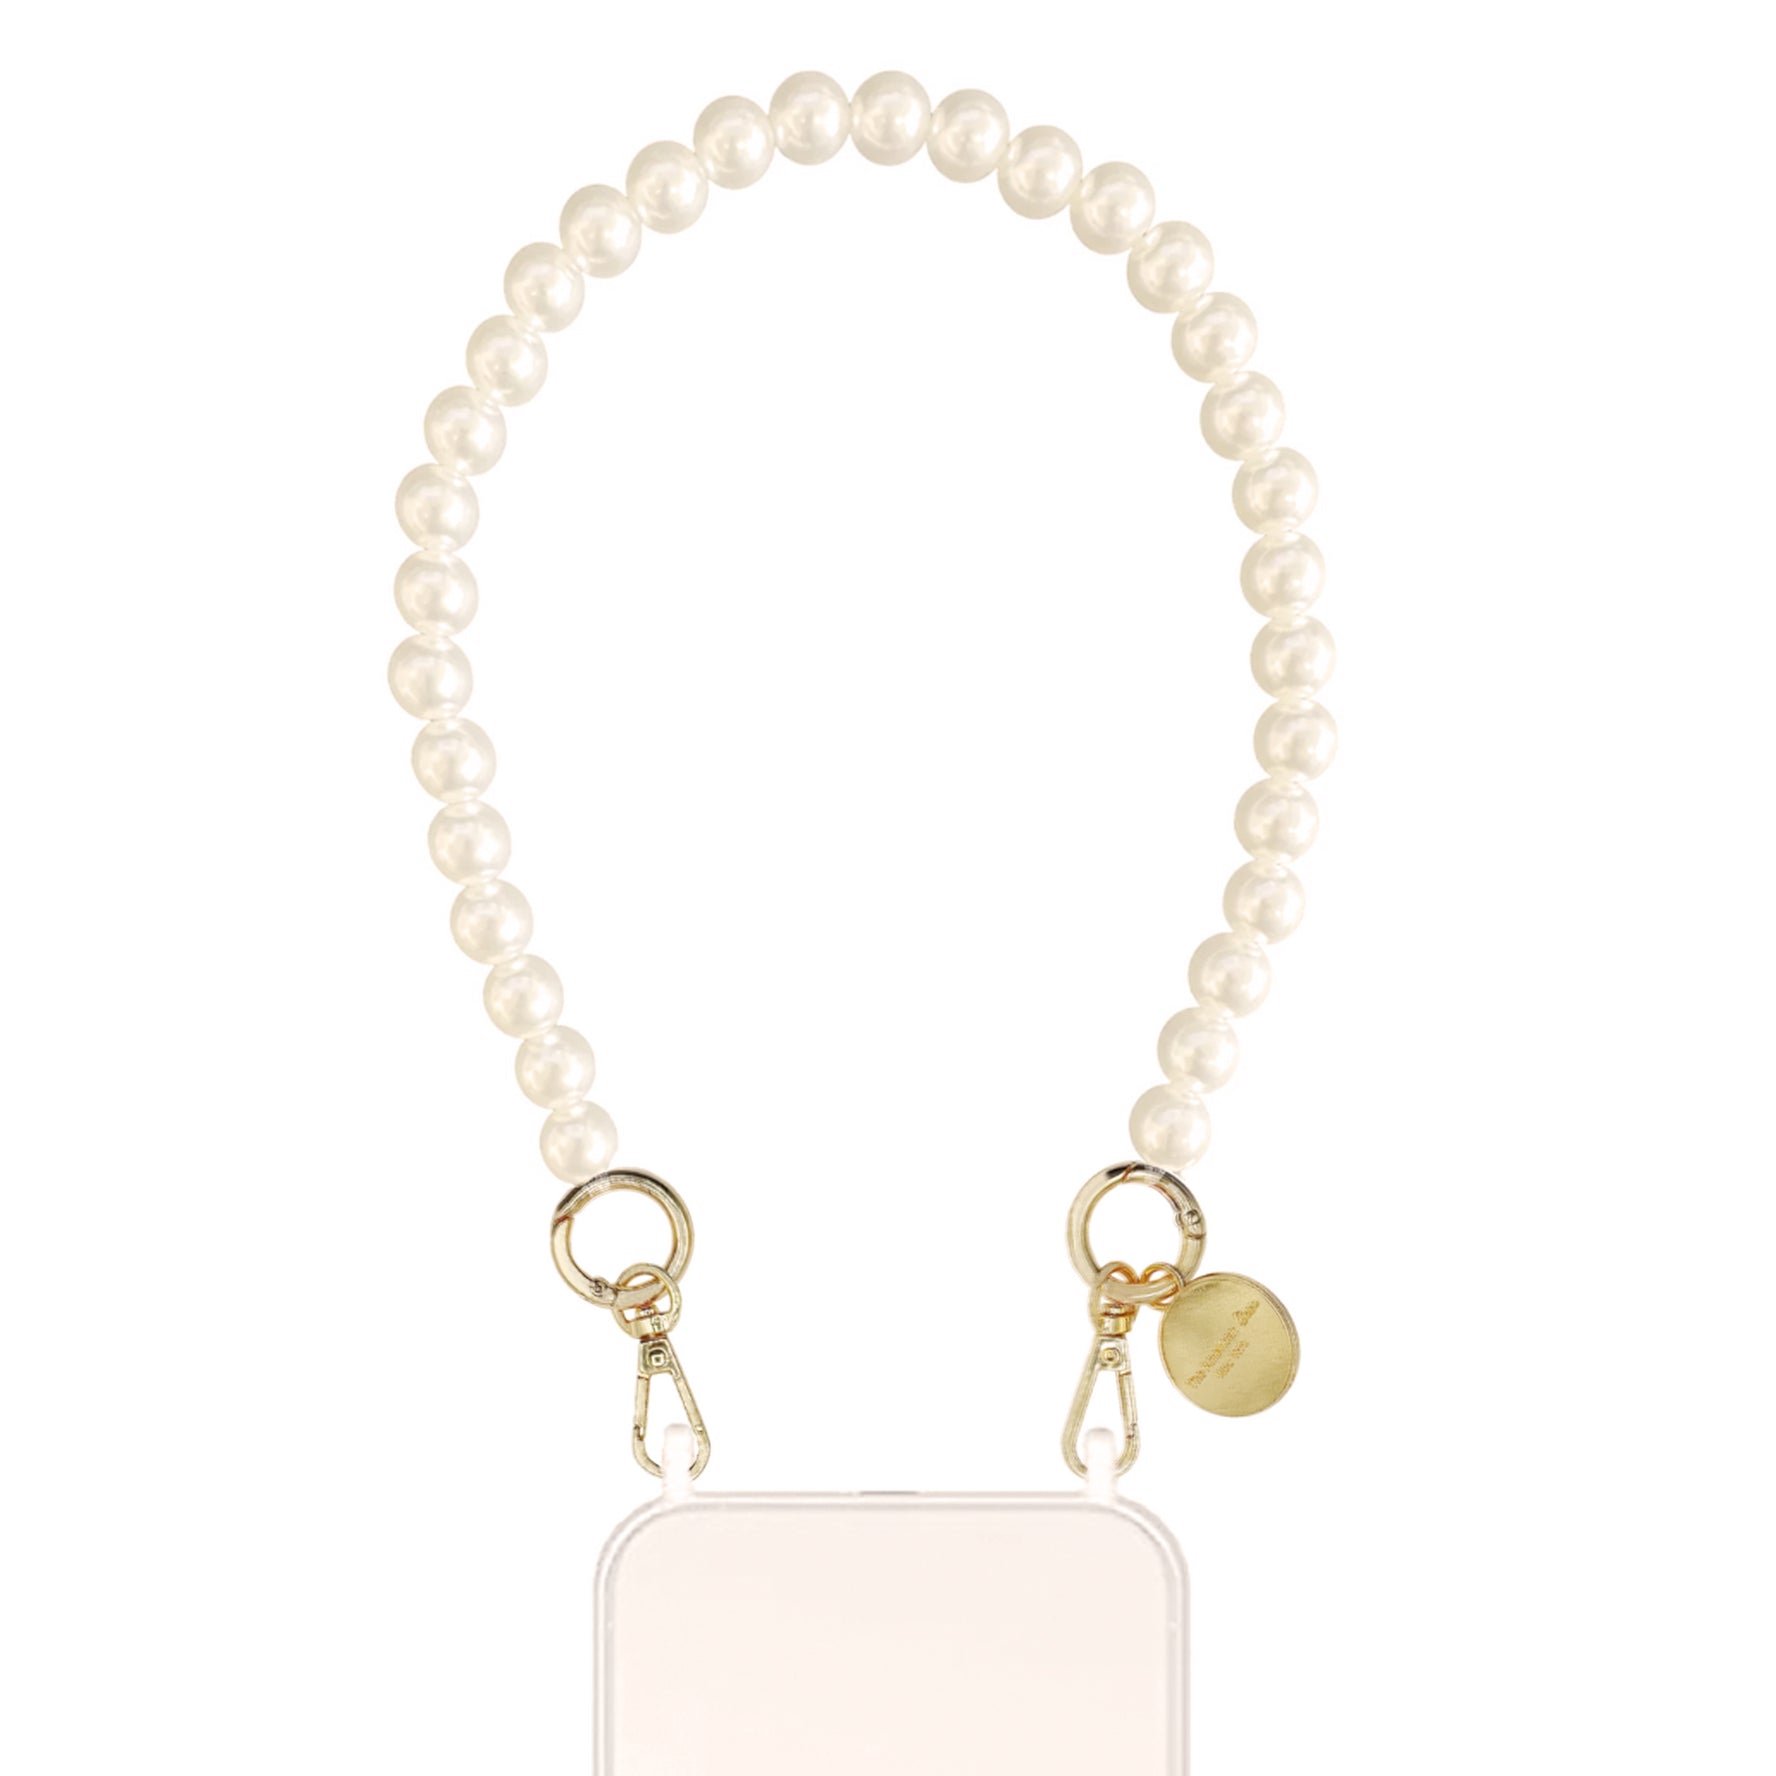 Emily - White Pearl Bracelet Chain with Gold Carabiners